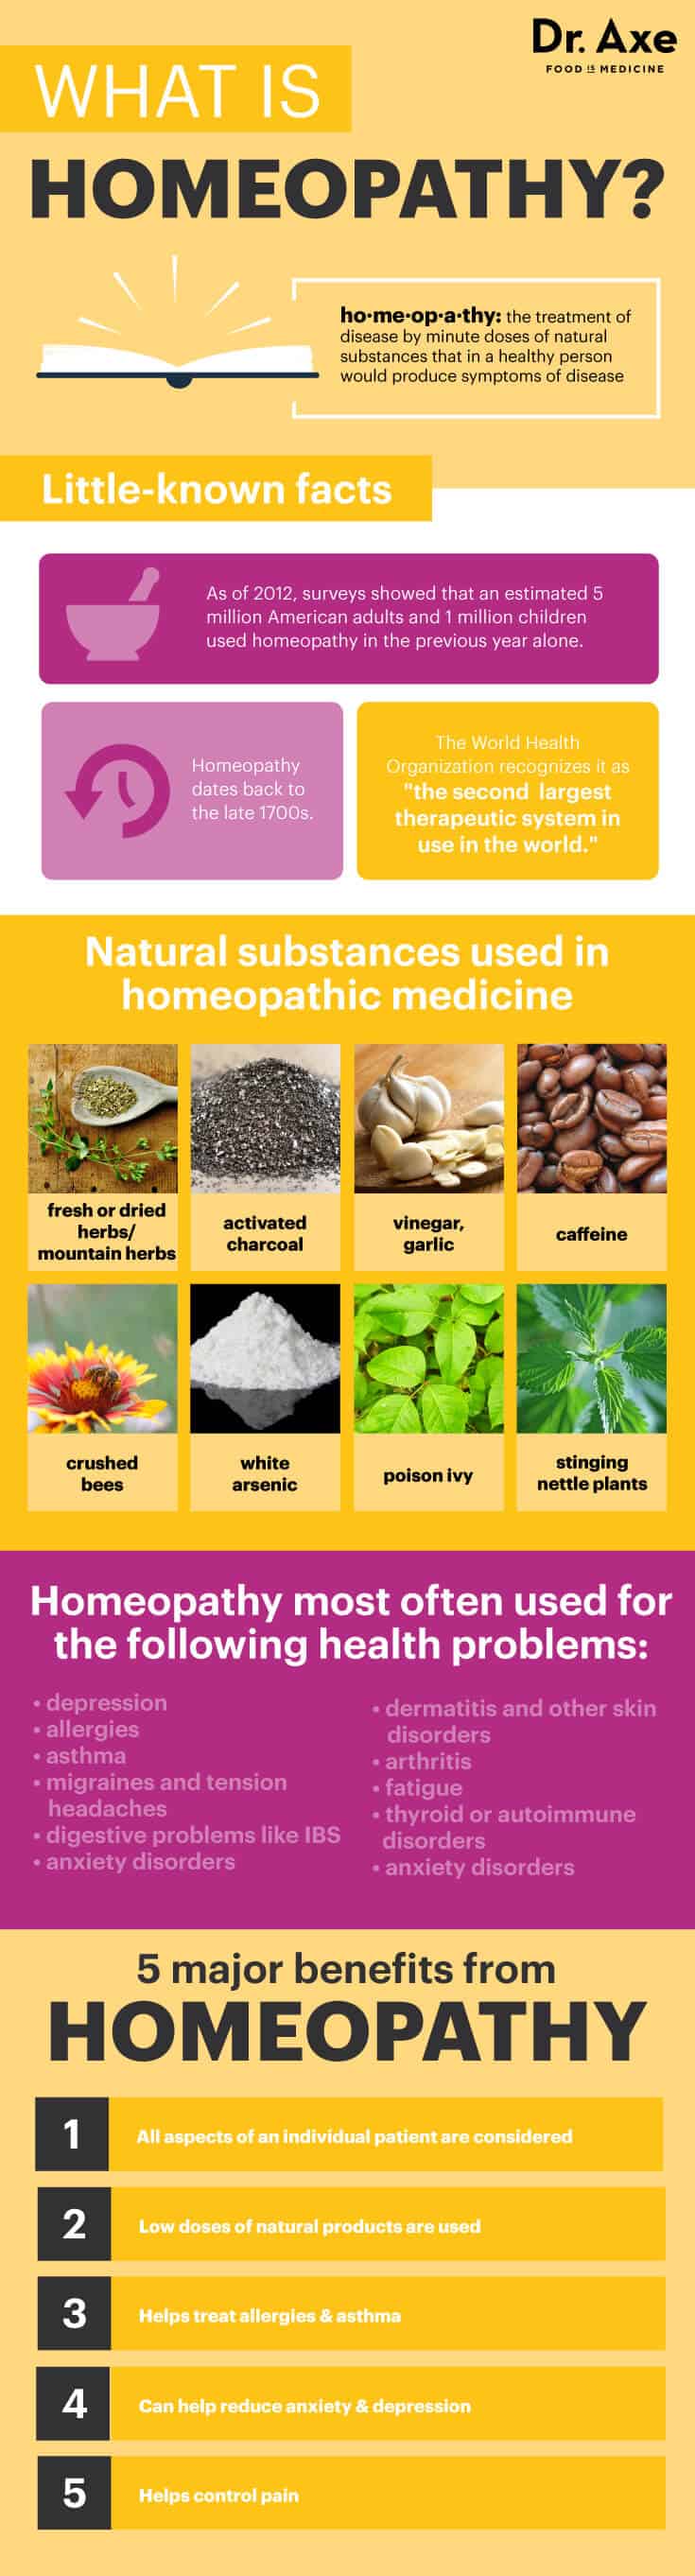 What is homeopathy? - Dr. Axe